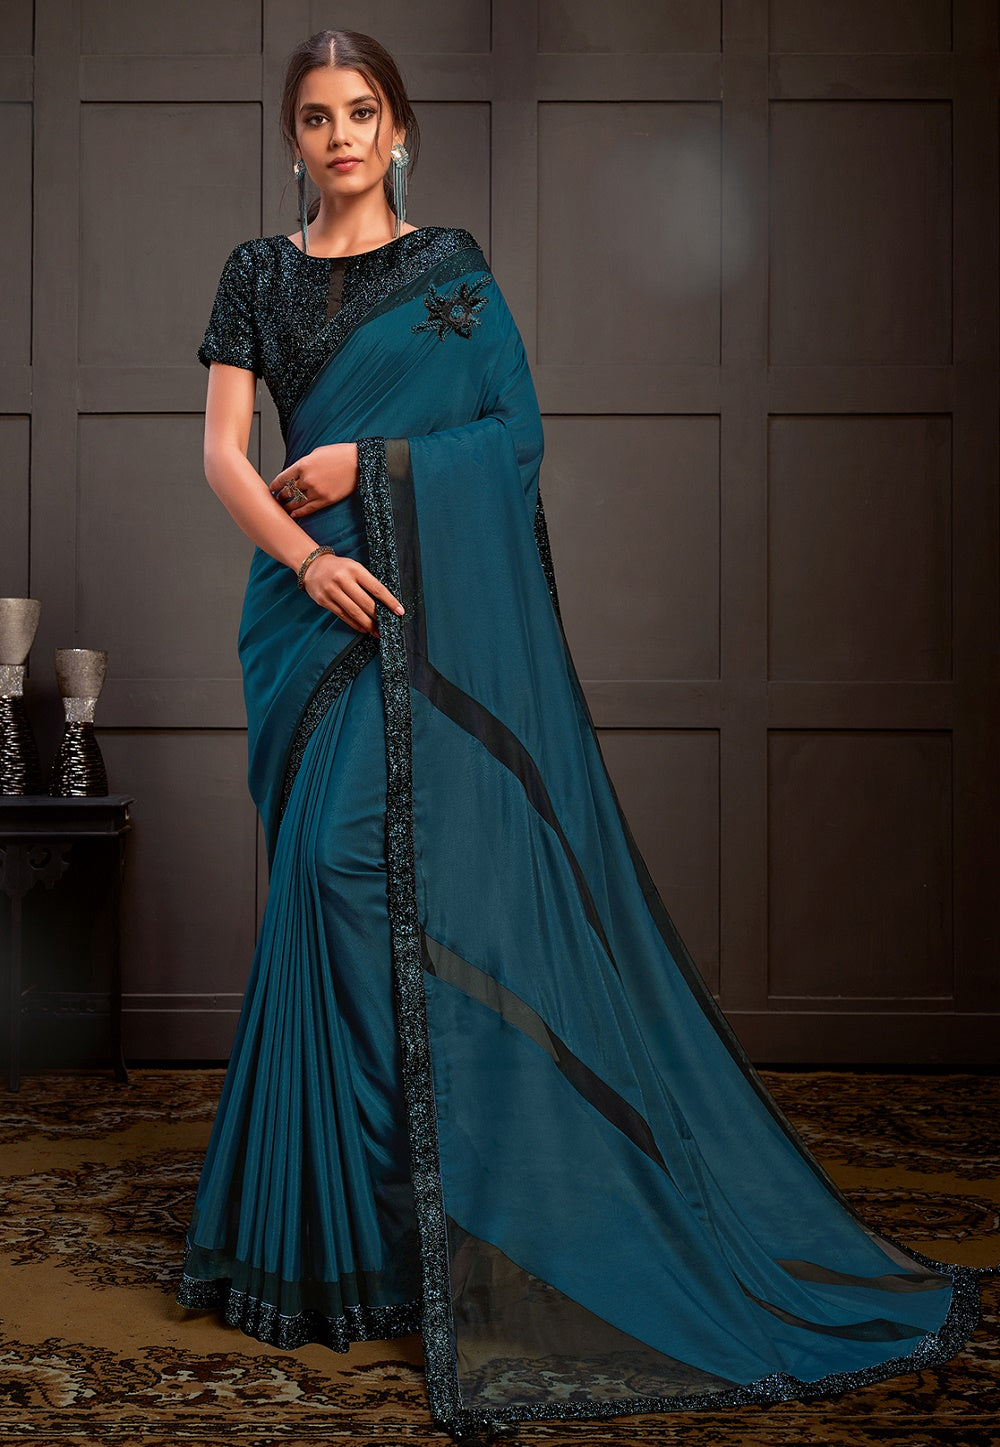 Embroidered Silk Georgette Saree in Teal Blue